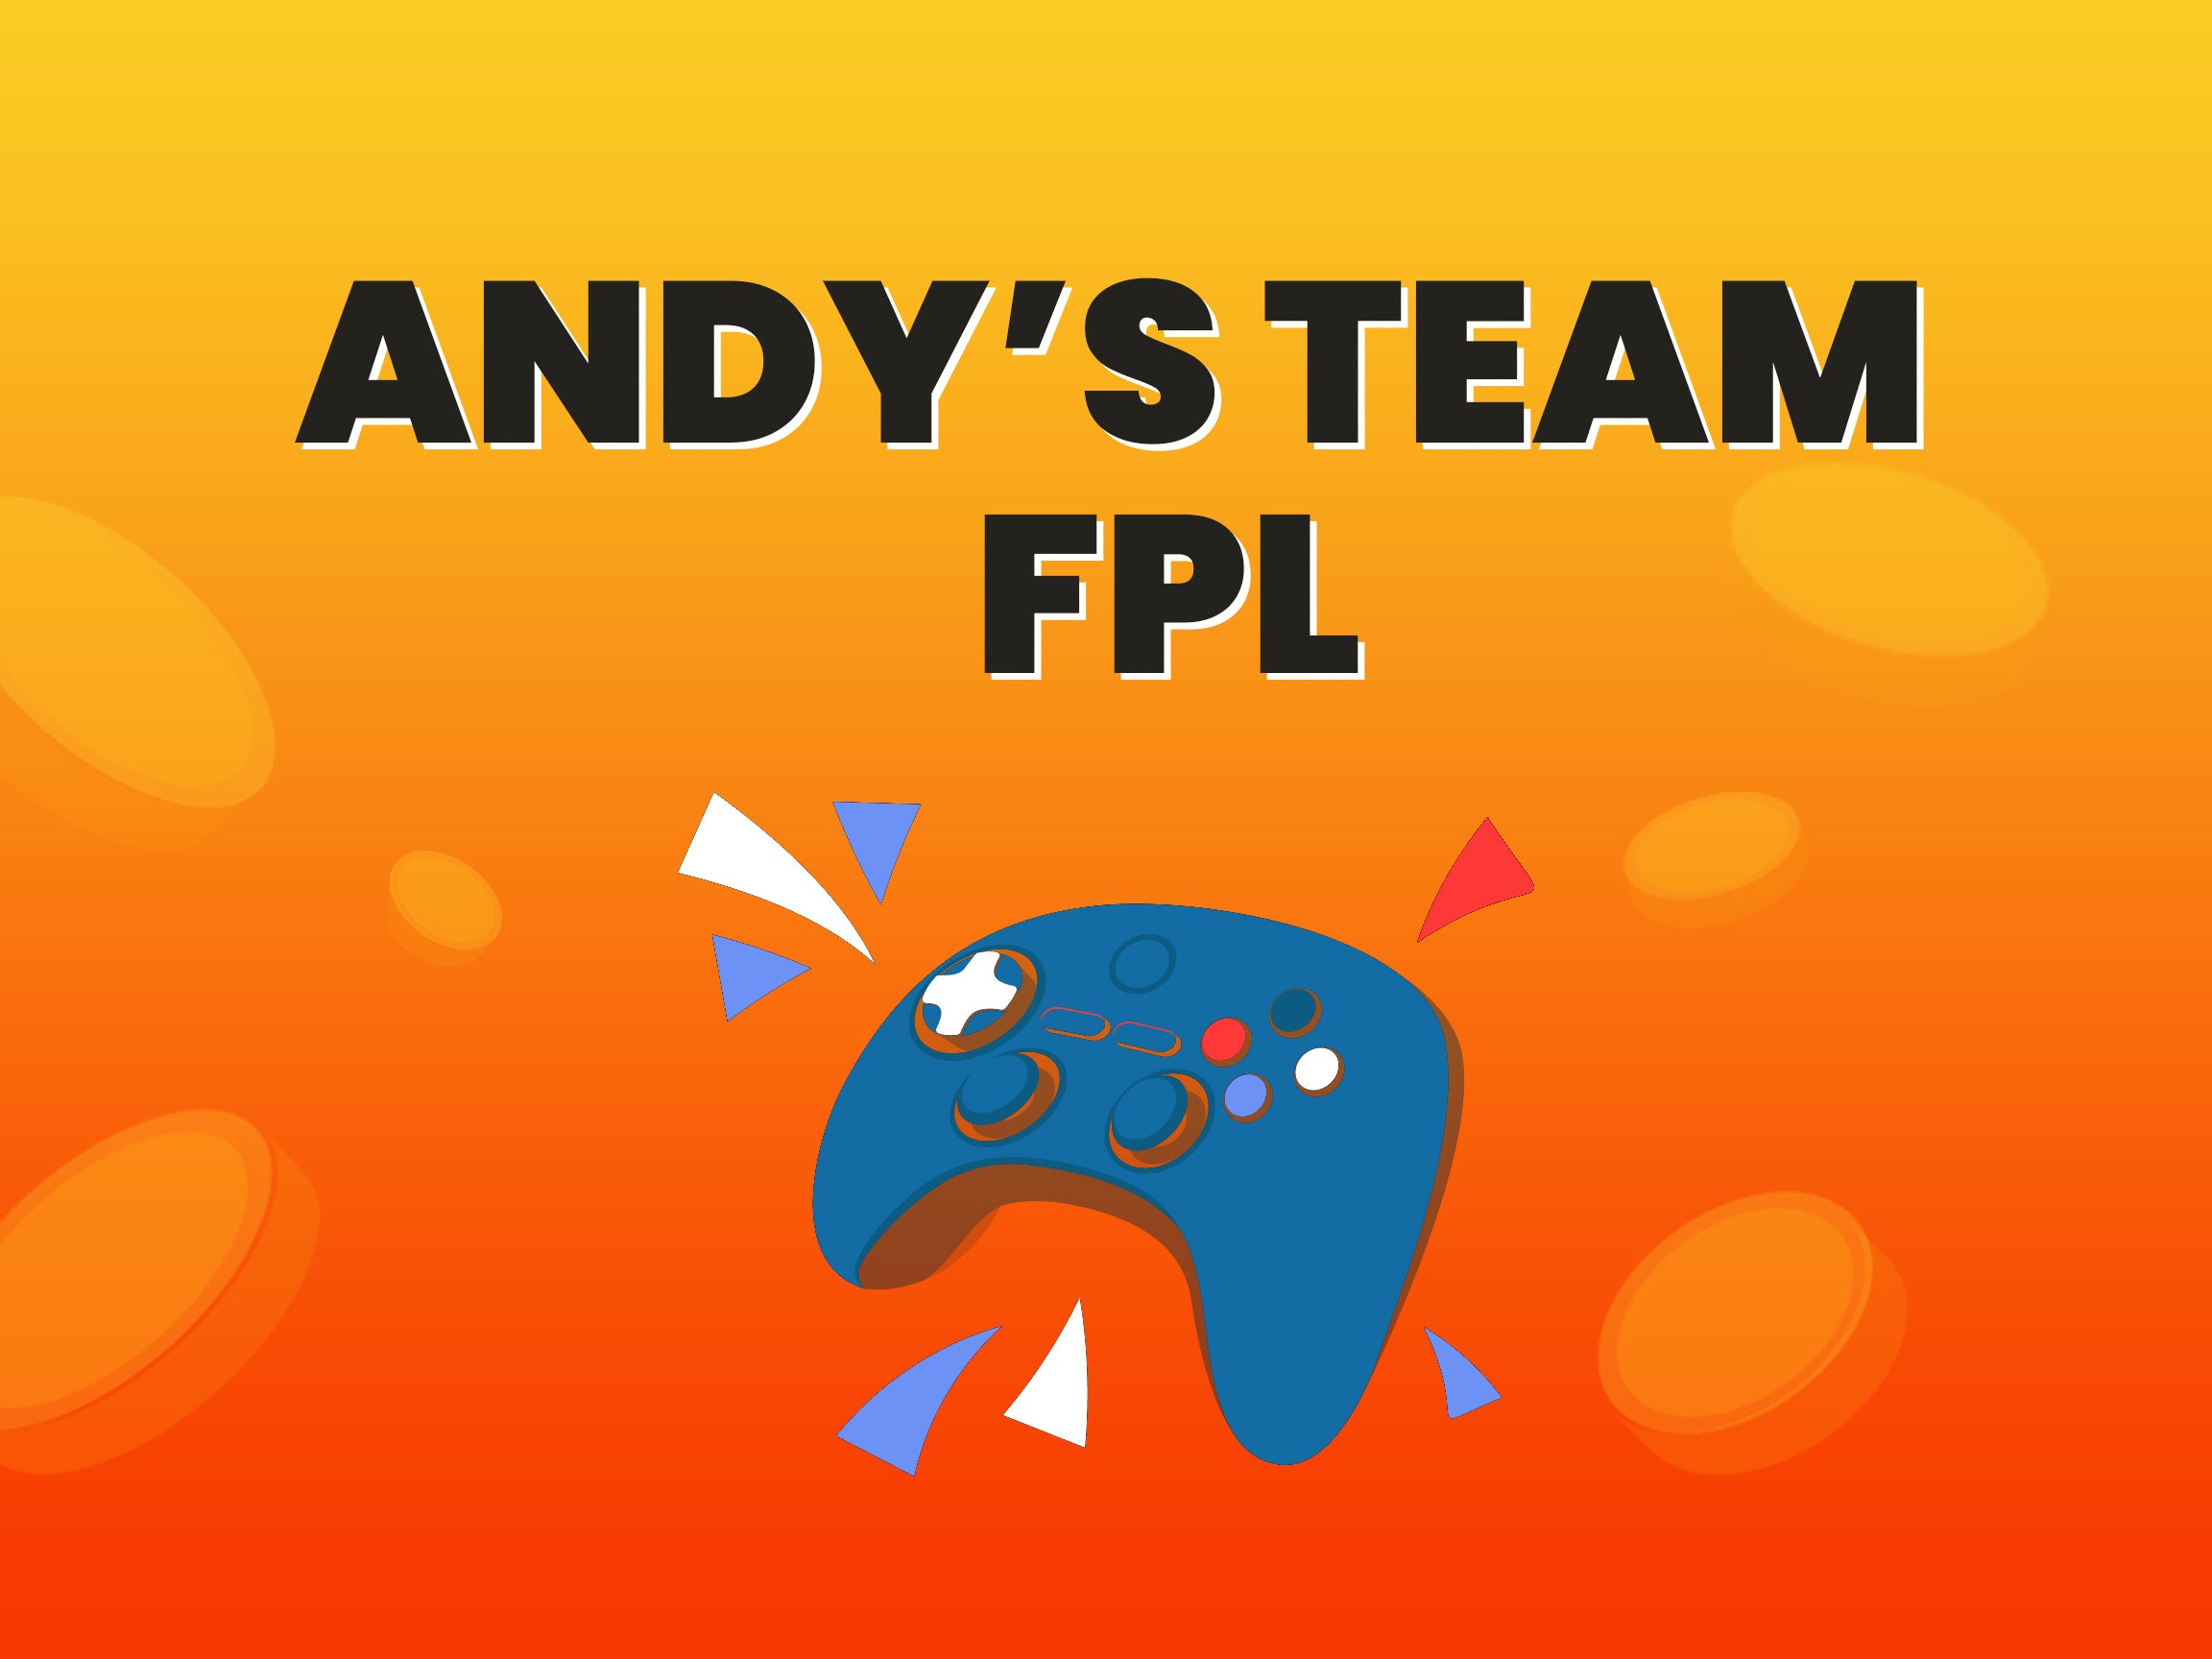 Andy FPL's Team